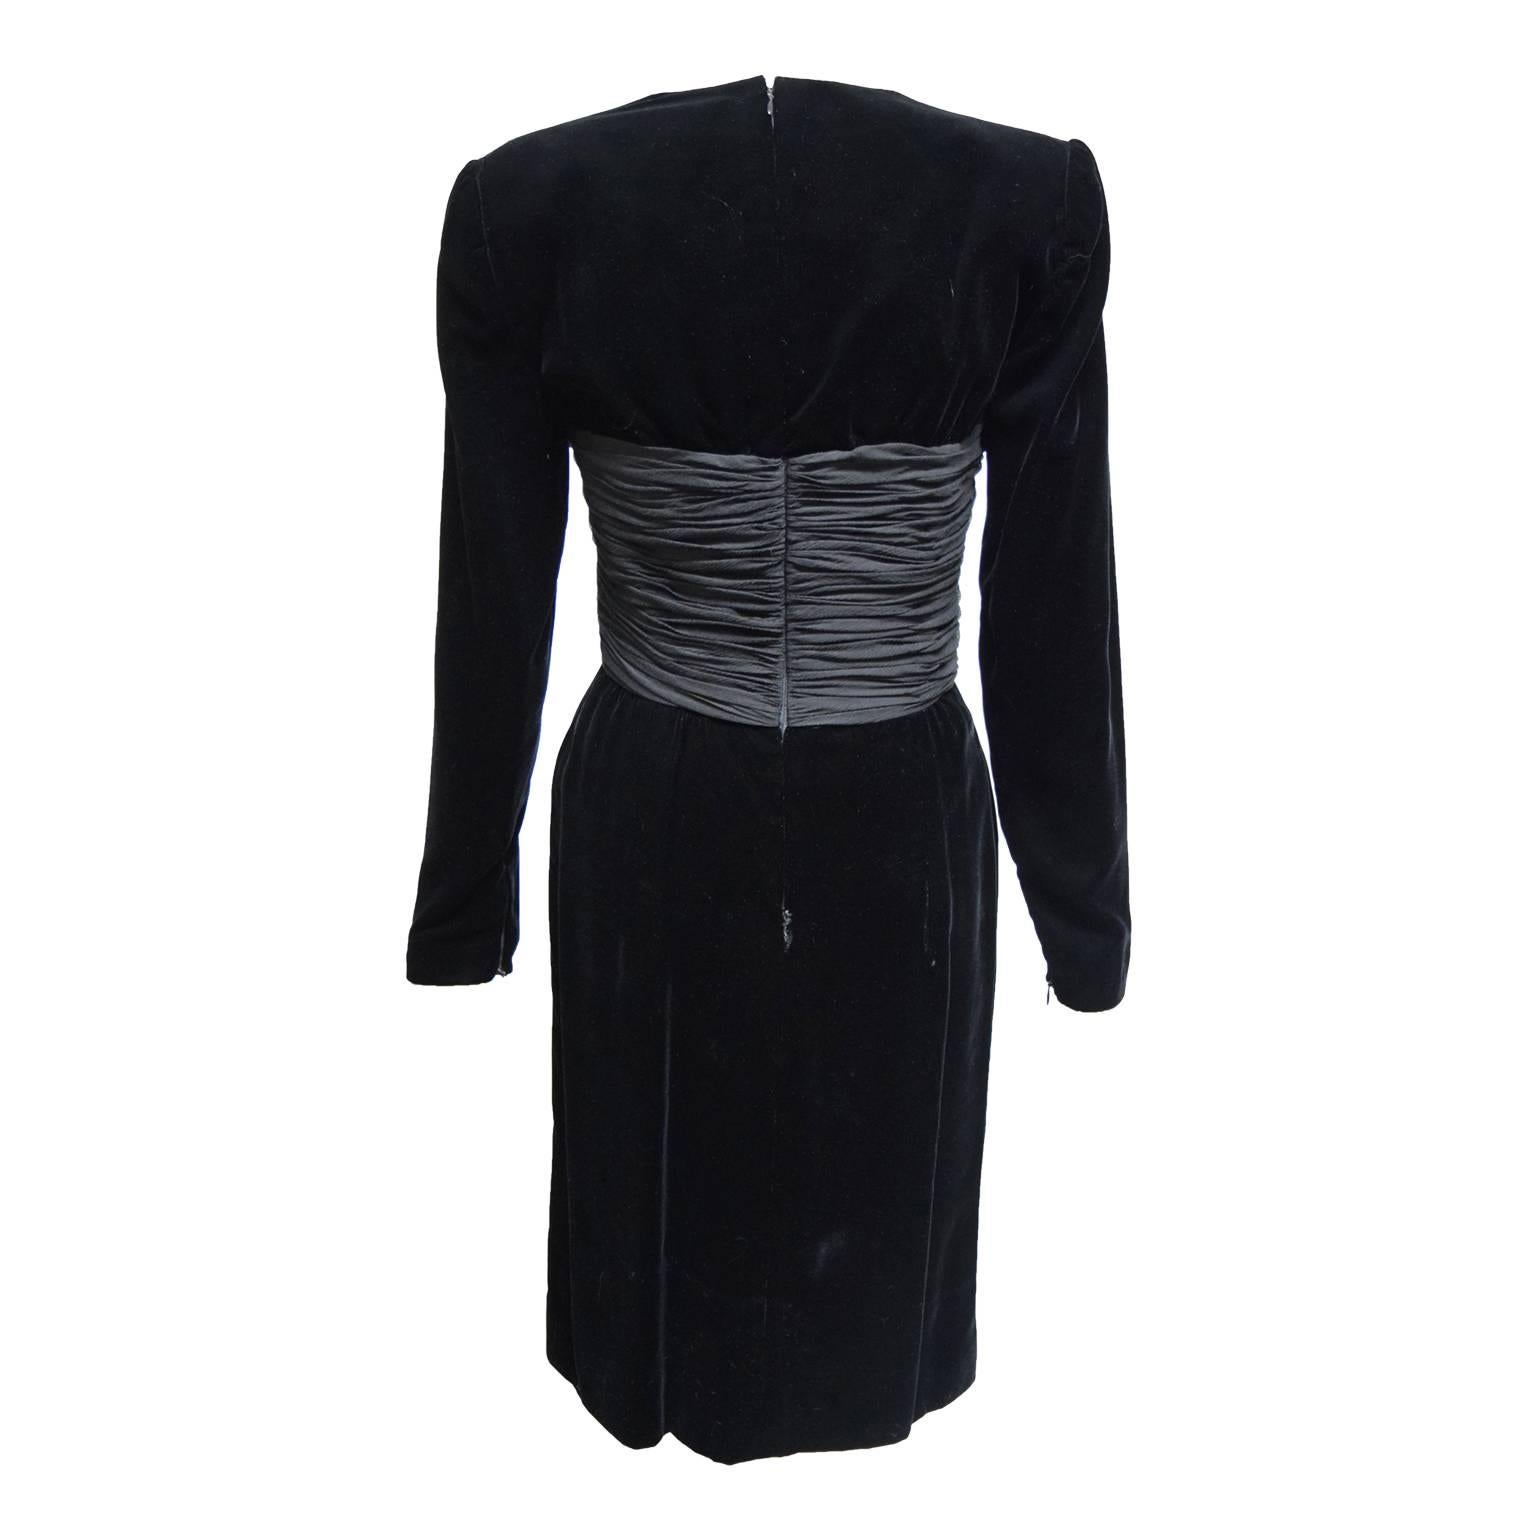 This beautiful dress by Oscar da la Renta is a silk and velvet blend. The dress is fully lined and has a back zipped closure. The bodice has silk crepe draped creating an asymmetrical look and continues in the back.   